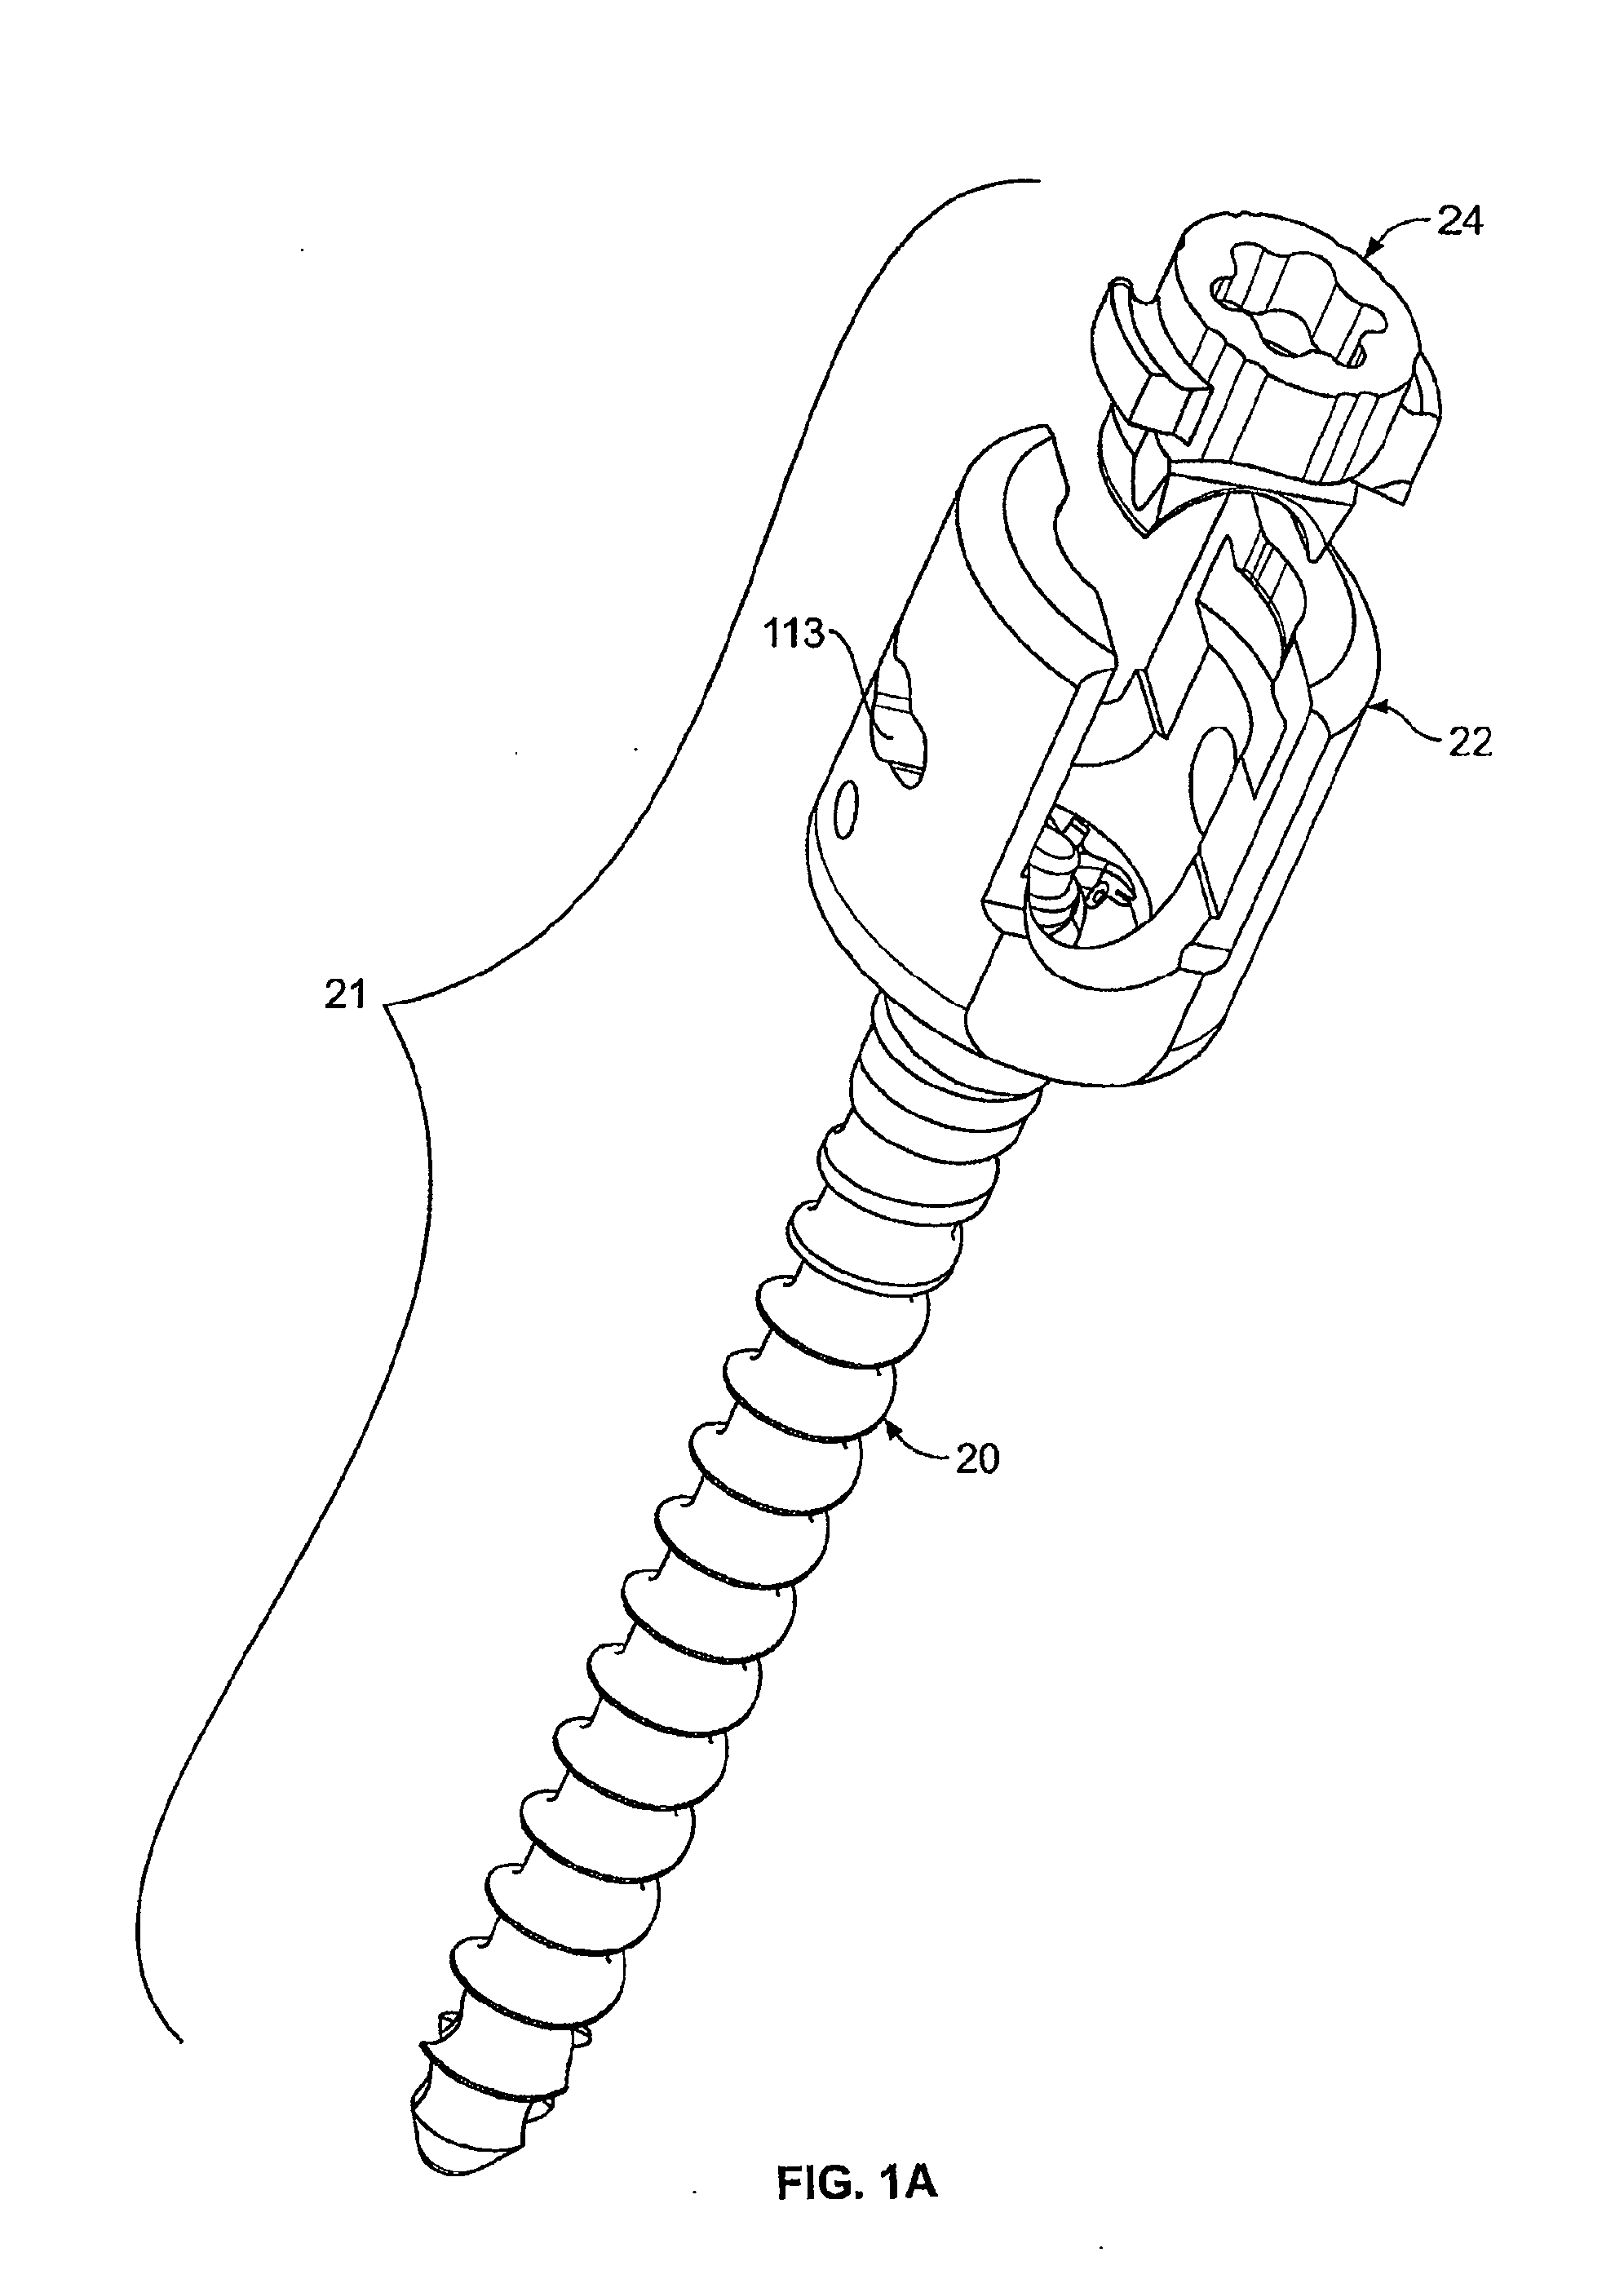 Minimally Invasive Surgical System